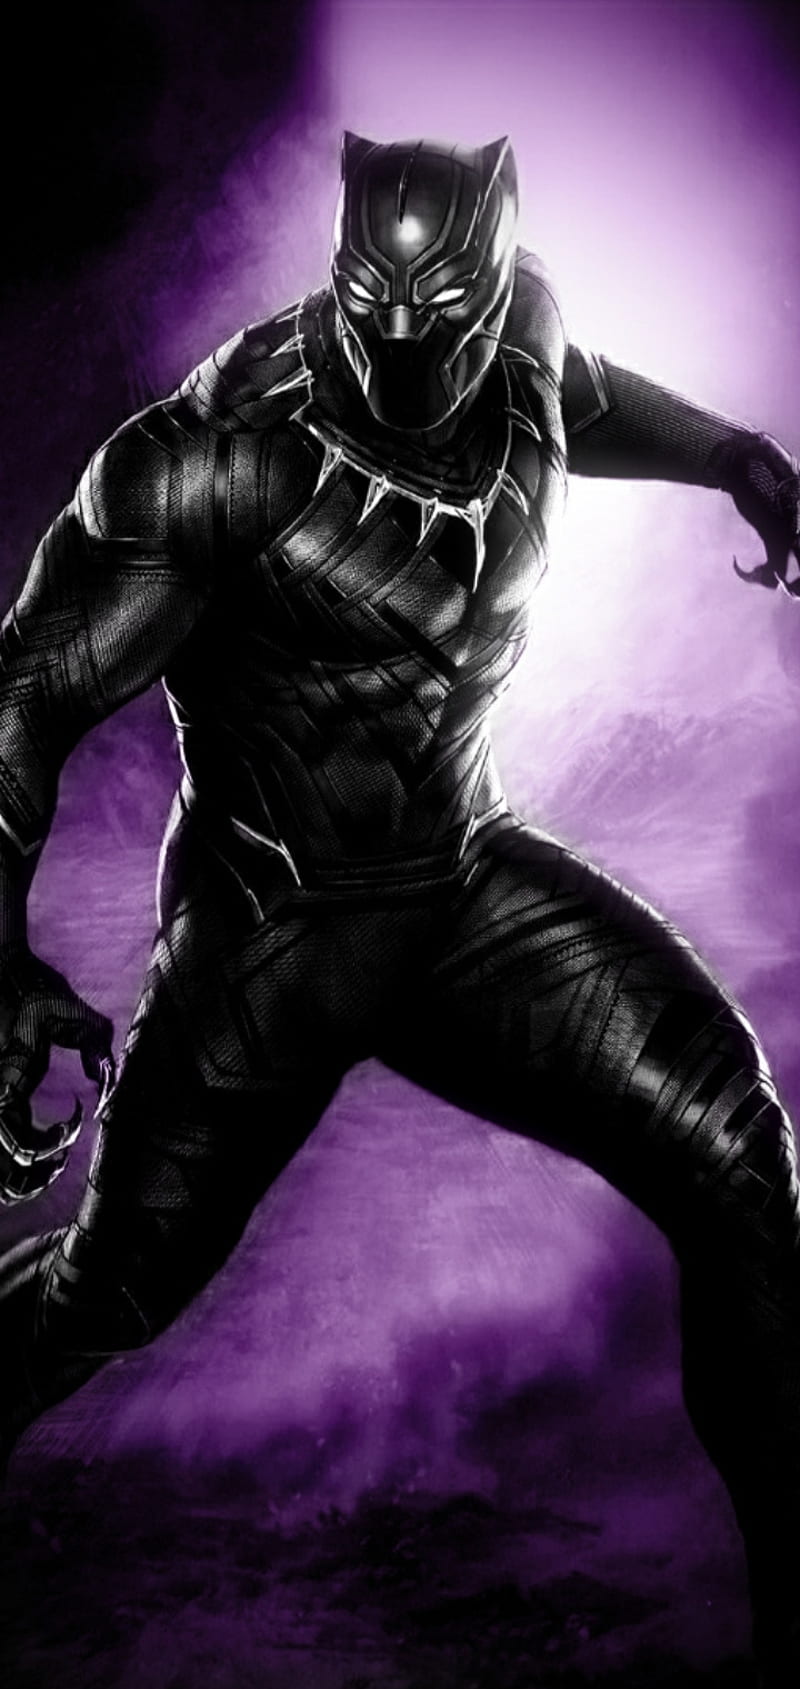 Black-Panther-new-purple-suit-wallpaper-HD - The Dark Carnival